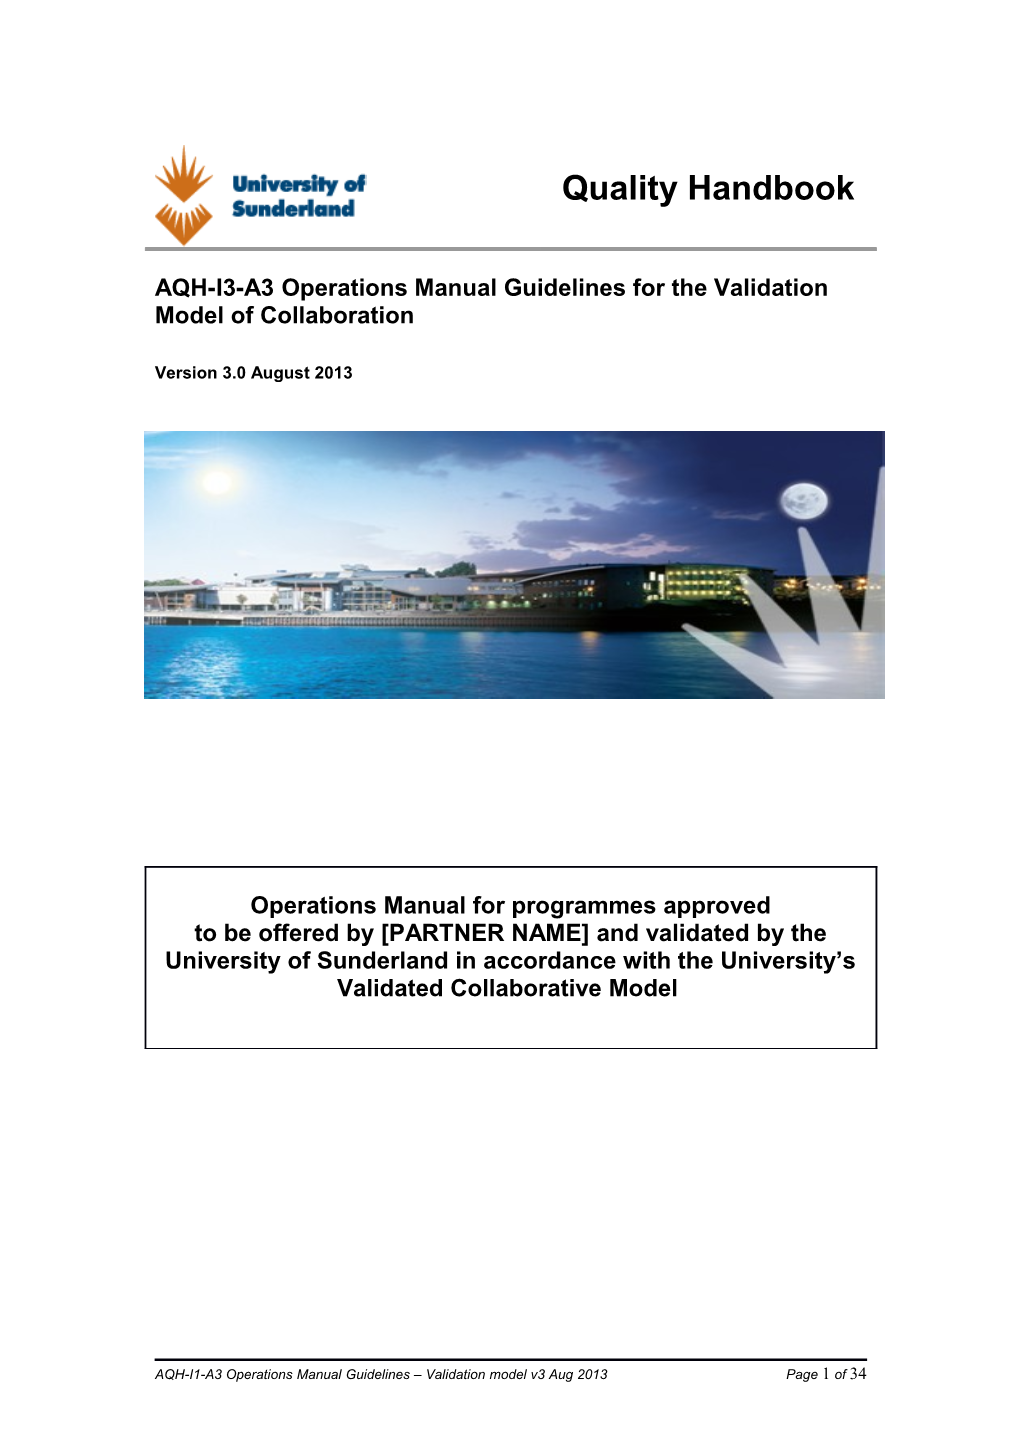 AQH-I3-A3 Operations Manual Guidelines for the Validation Model of Collaboration